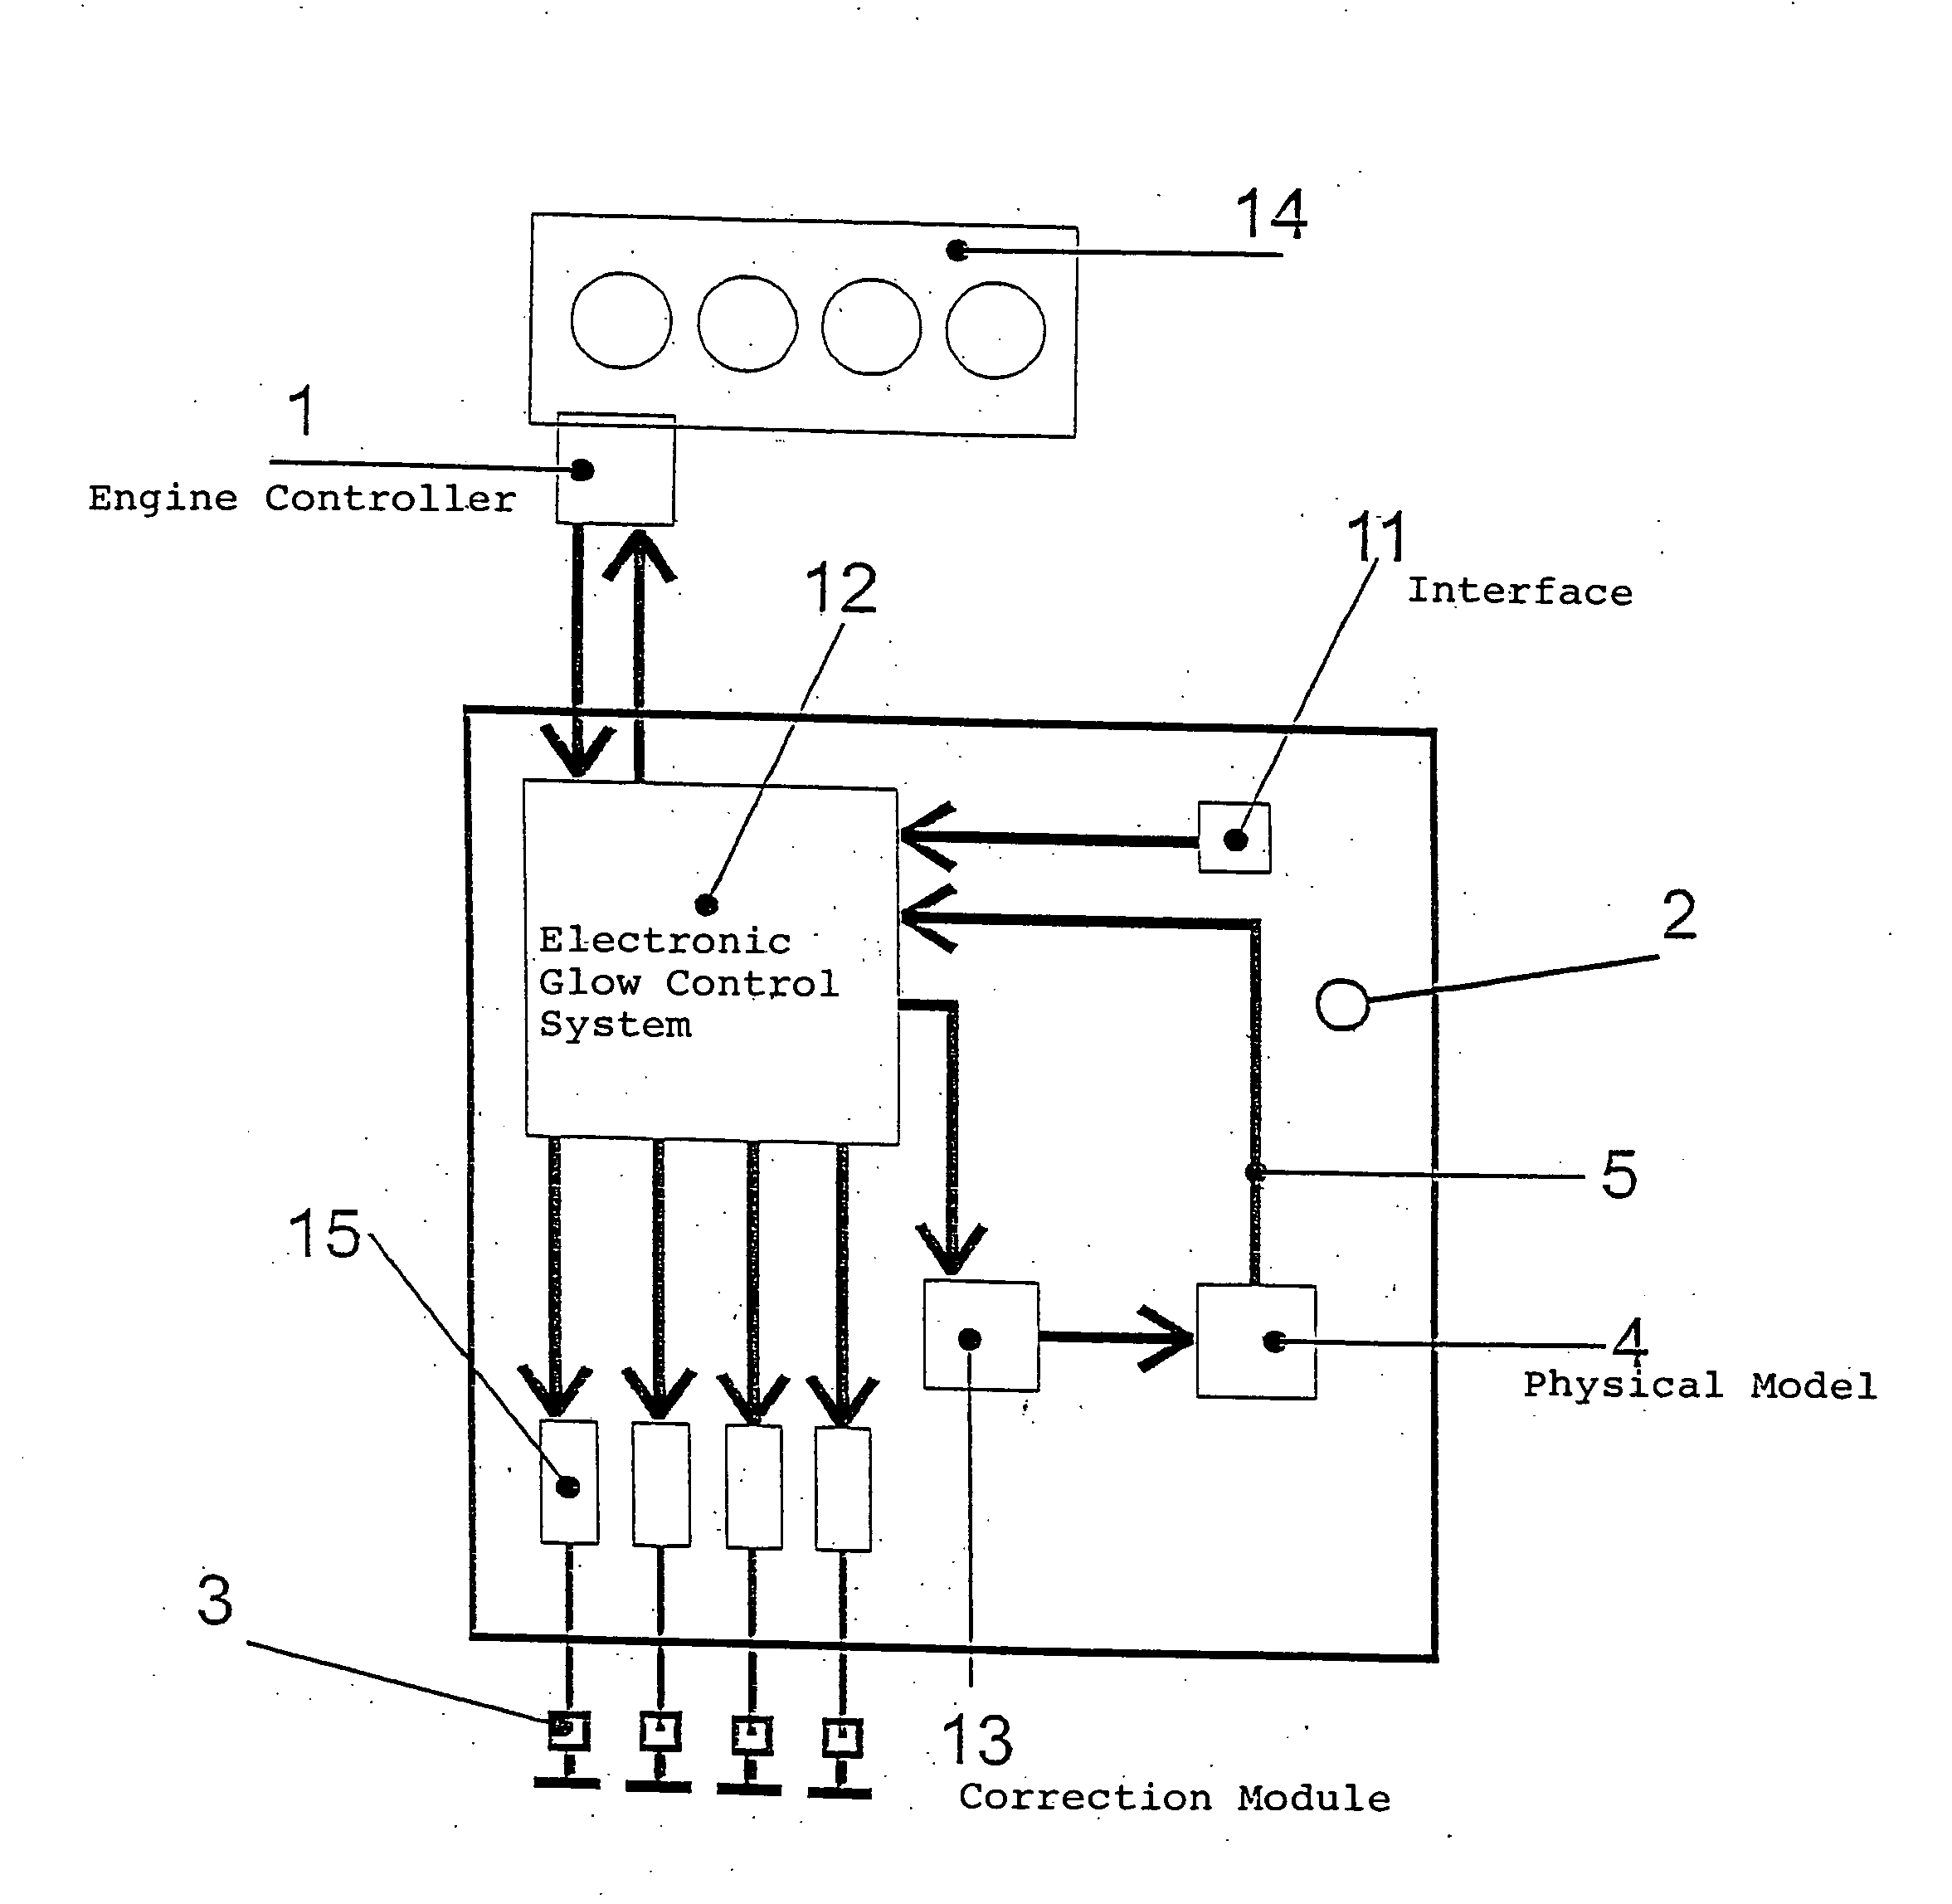 Method for heating a glow plug for a diesel engine